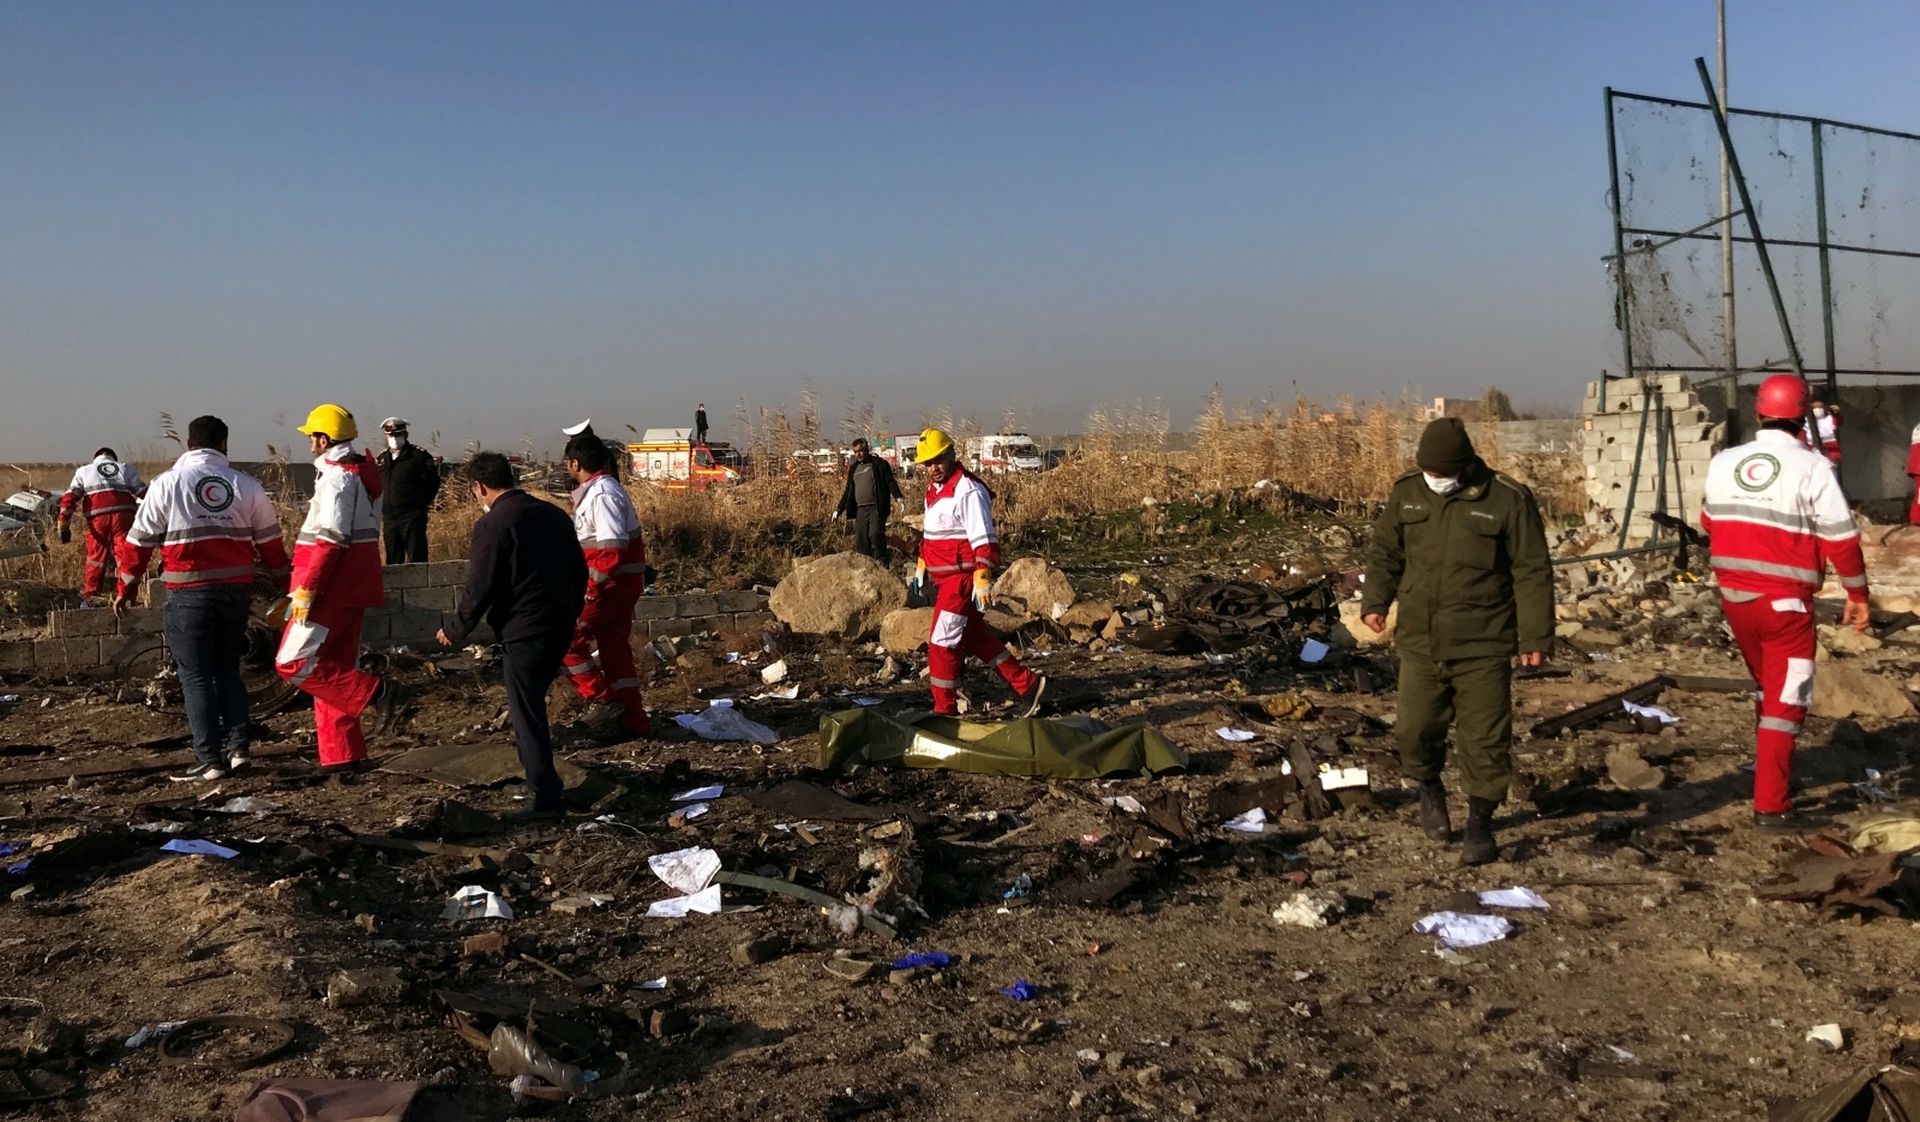 Rescuers team check the debris from a plane crash belonging to Ukraine International Airlines after take-off from Iran's Imam Khomeini airport, on the outskirts of Tehran Rescuers team check the debris from a plan crash belonging to Ukraine International Airlines after take-off from Iran's Imam Khomeini airport, on the outskirts of Tehran, Iran January 8, 2020. Nazanin Tabatabaee/WANA (West Asia News Agency) via REUTERS ATTENTION EDITORS - THIS IMAGE HAS BEEN SUPPLIED BY A THIRD PARTY WANA NEWS AGENCY